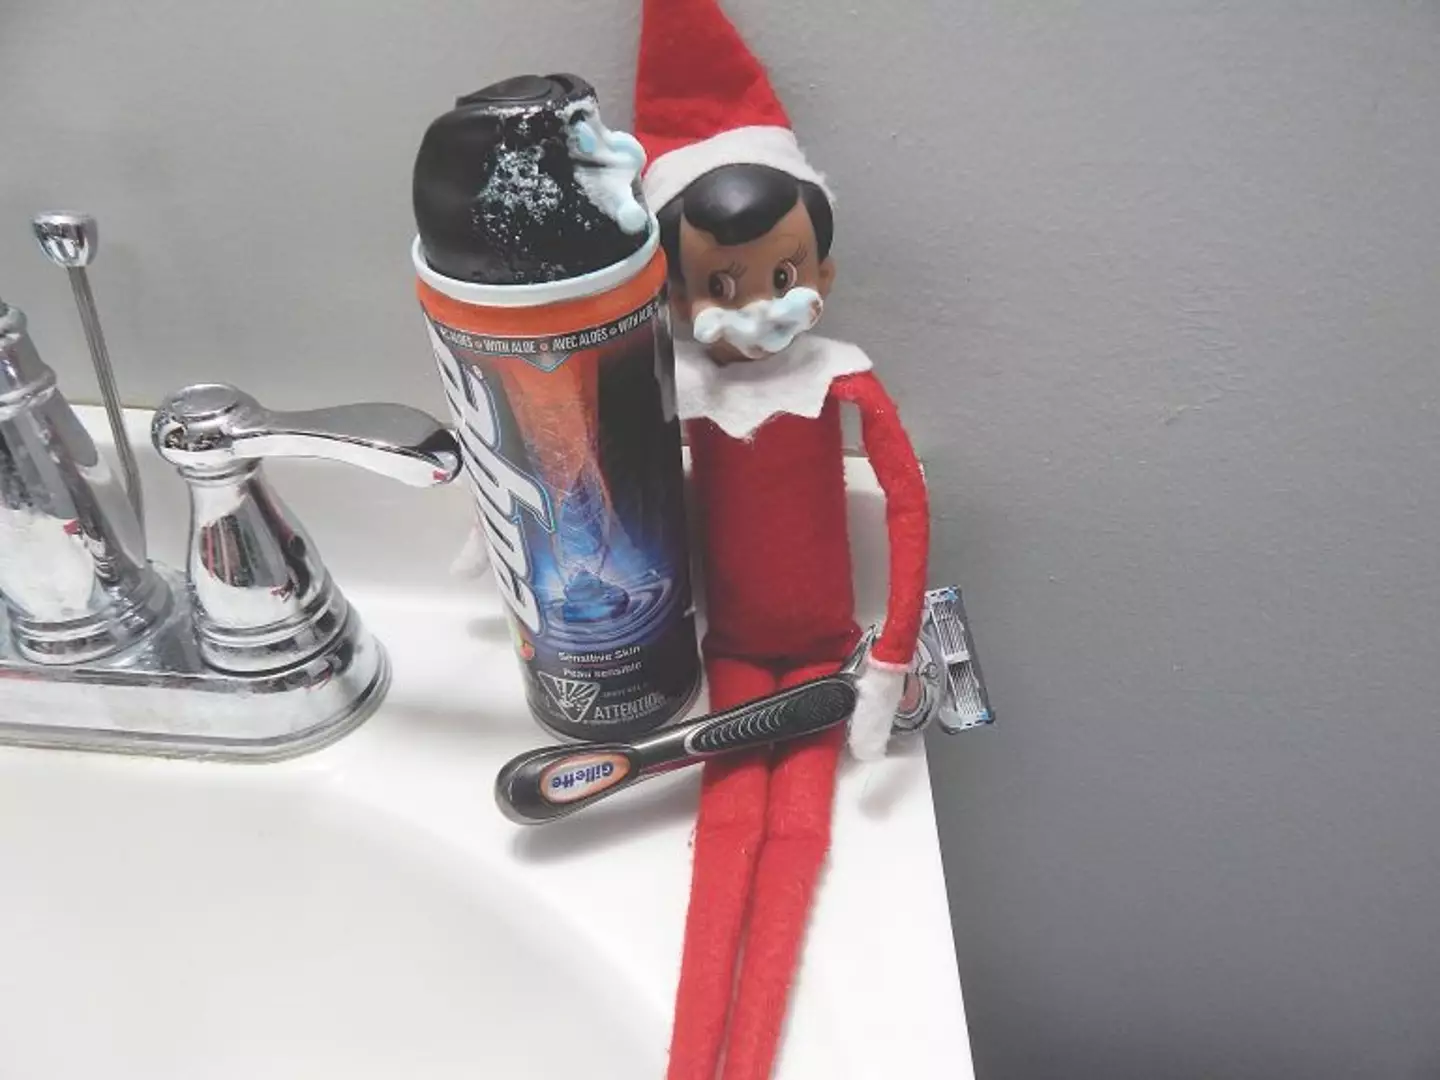 Elf having a shave. (